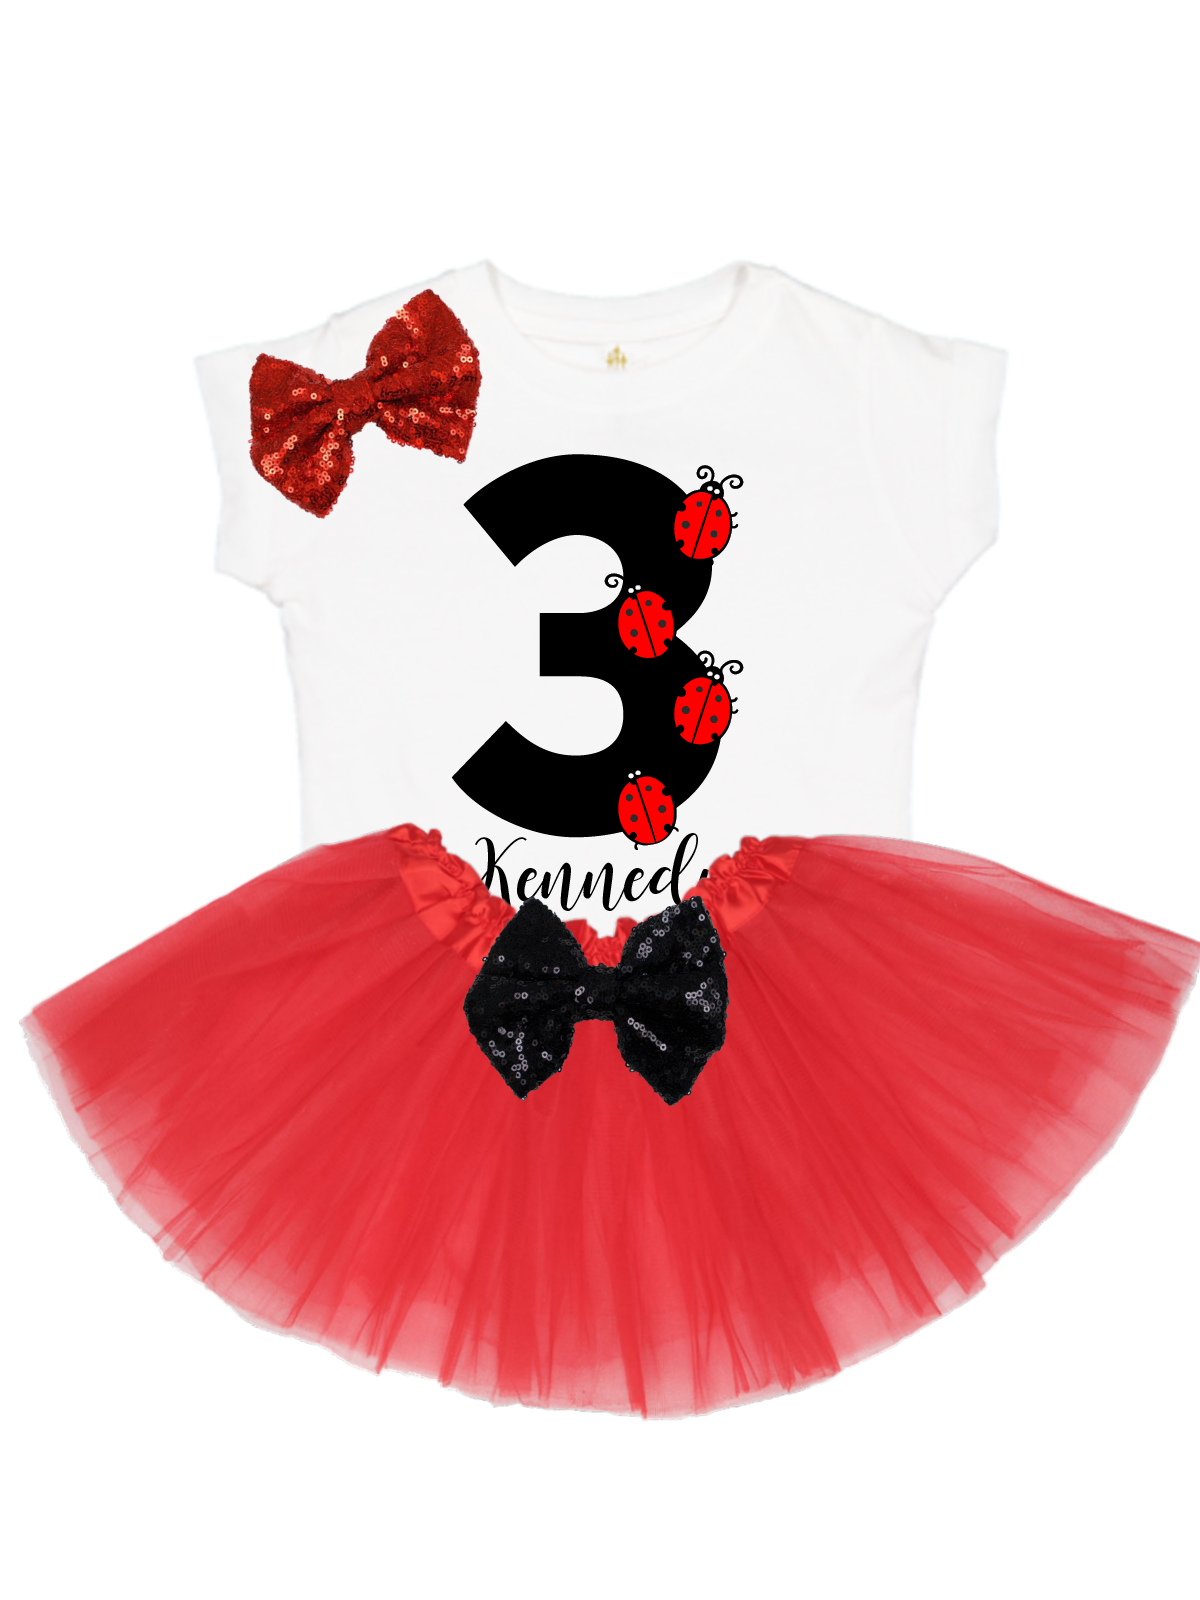 red and black ladybug tutu outfit